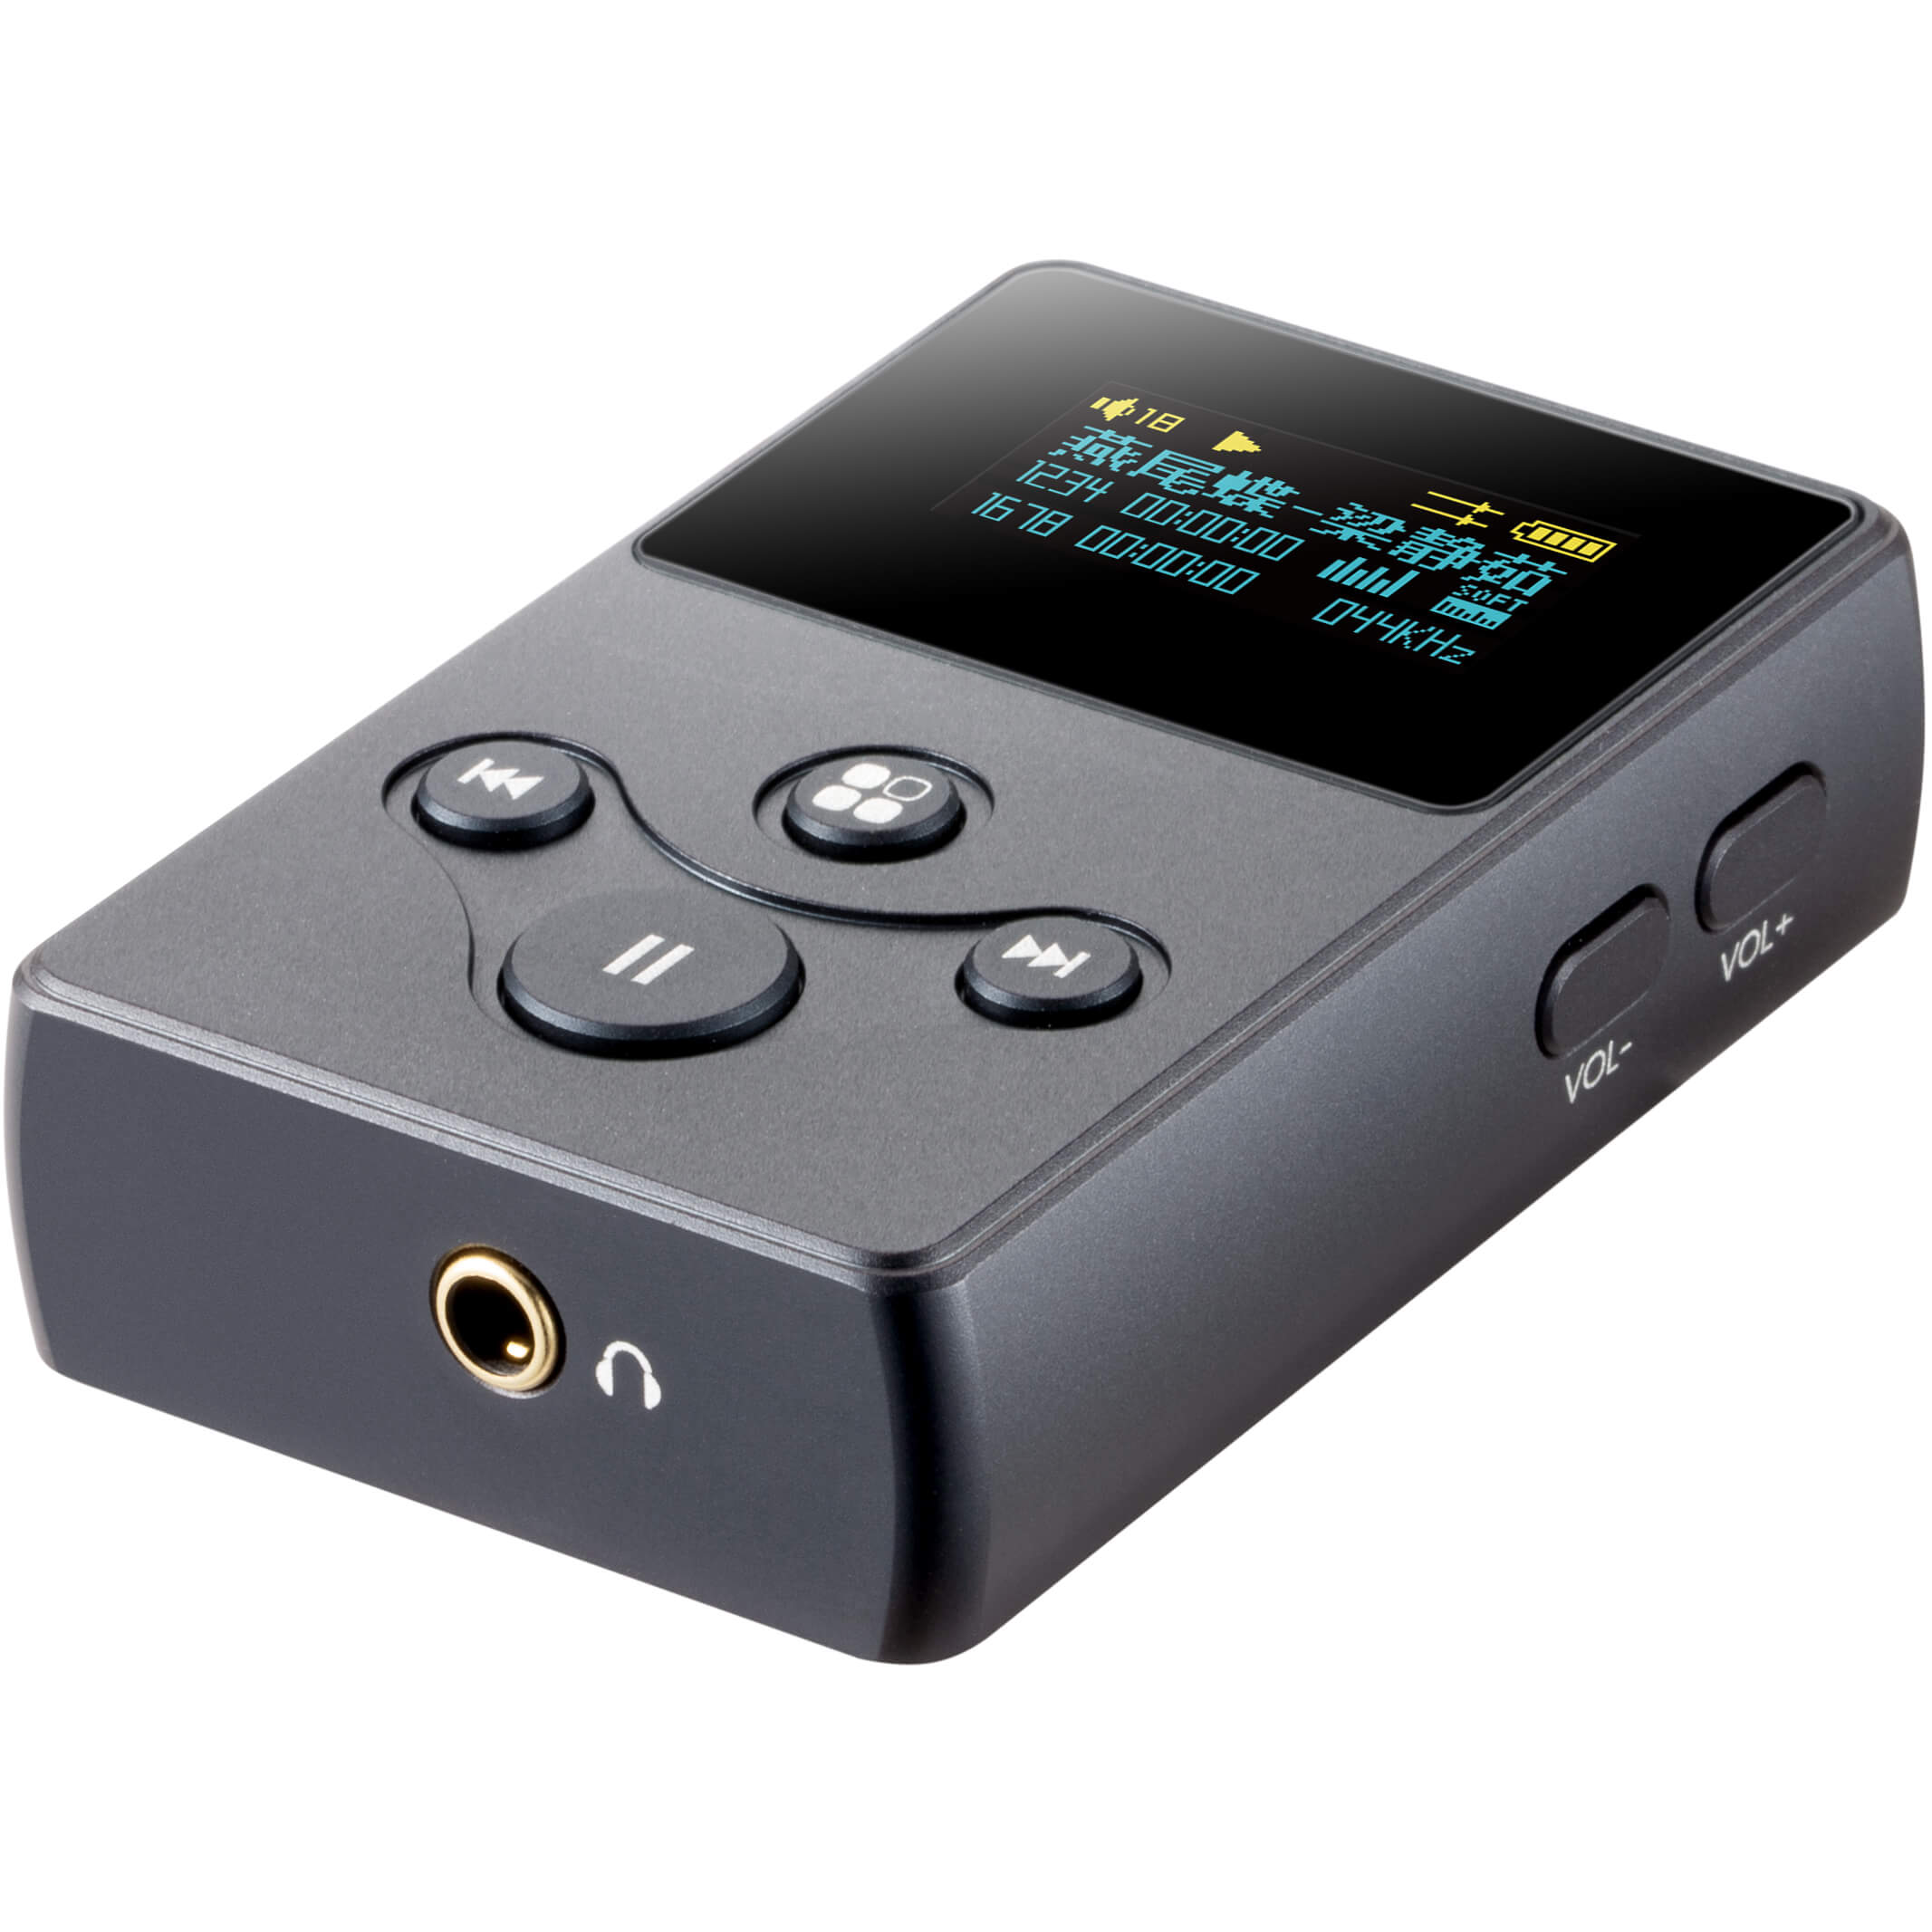 Buy xDuoo X2S Digital Audio Player at HiFiNage in India with warranty.